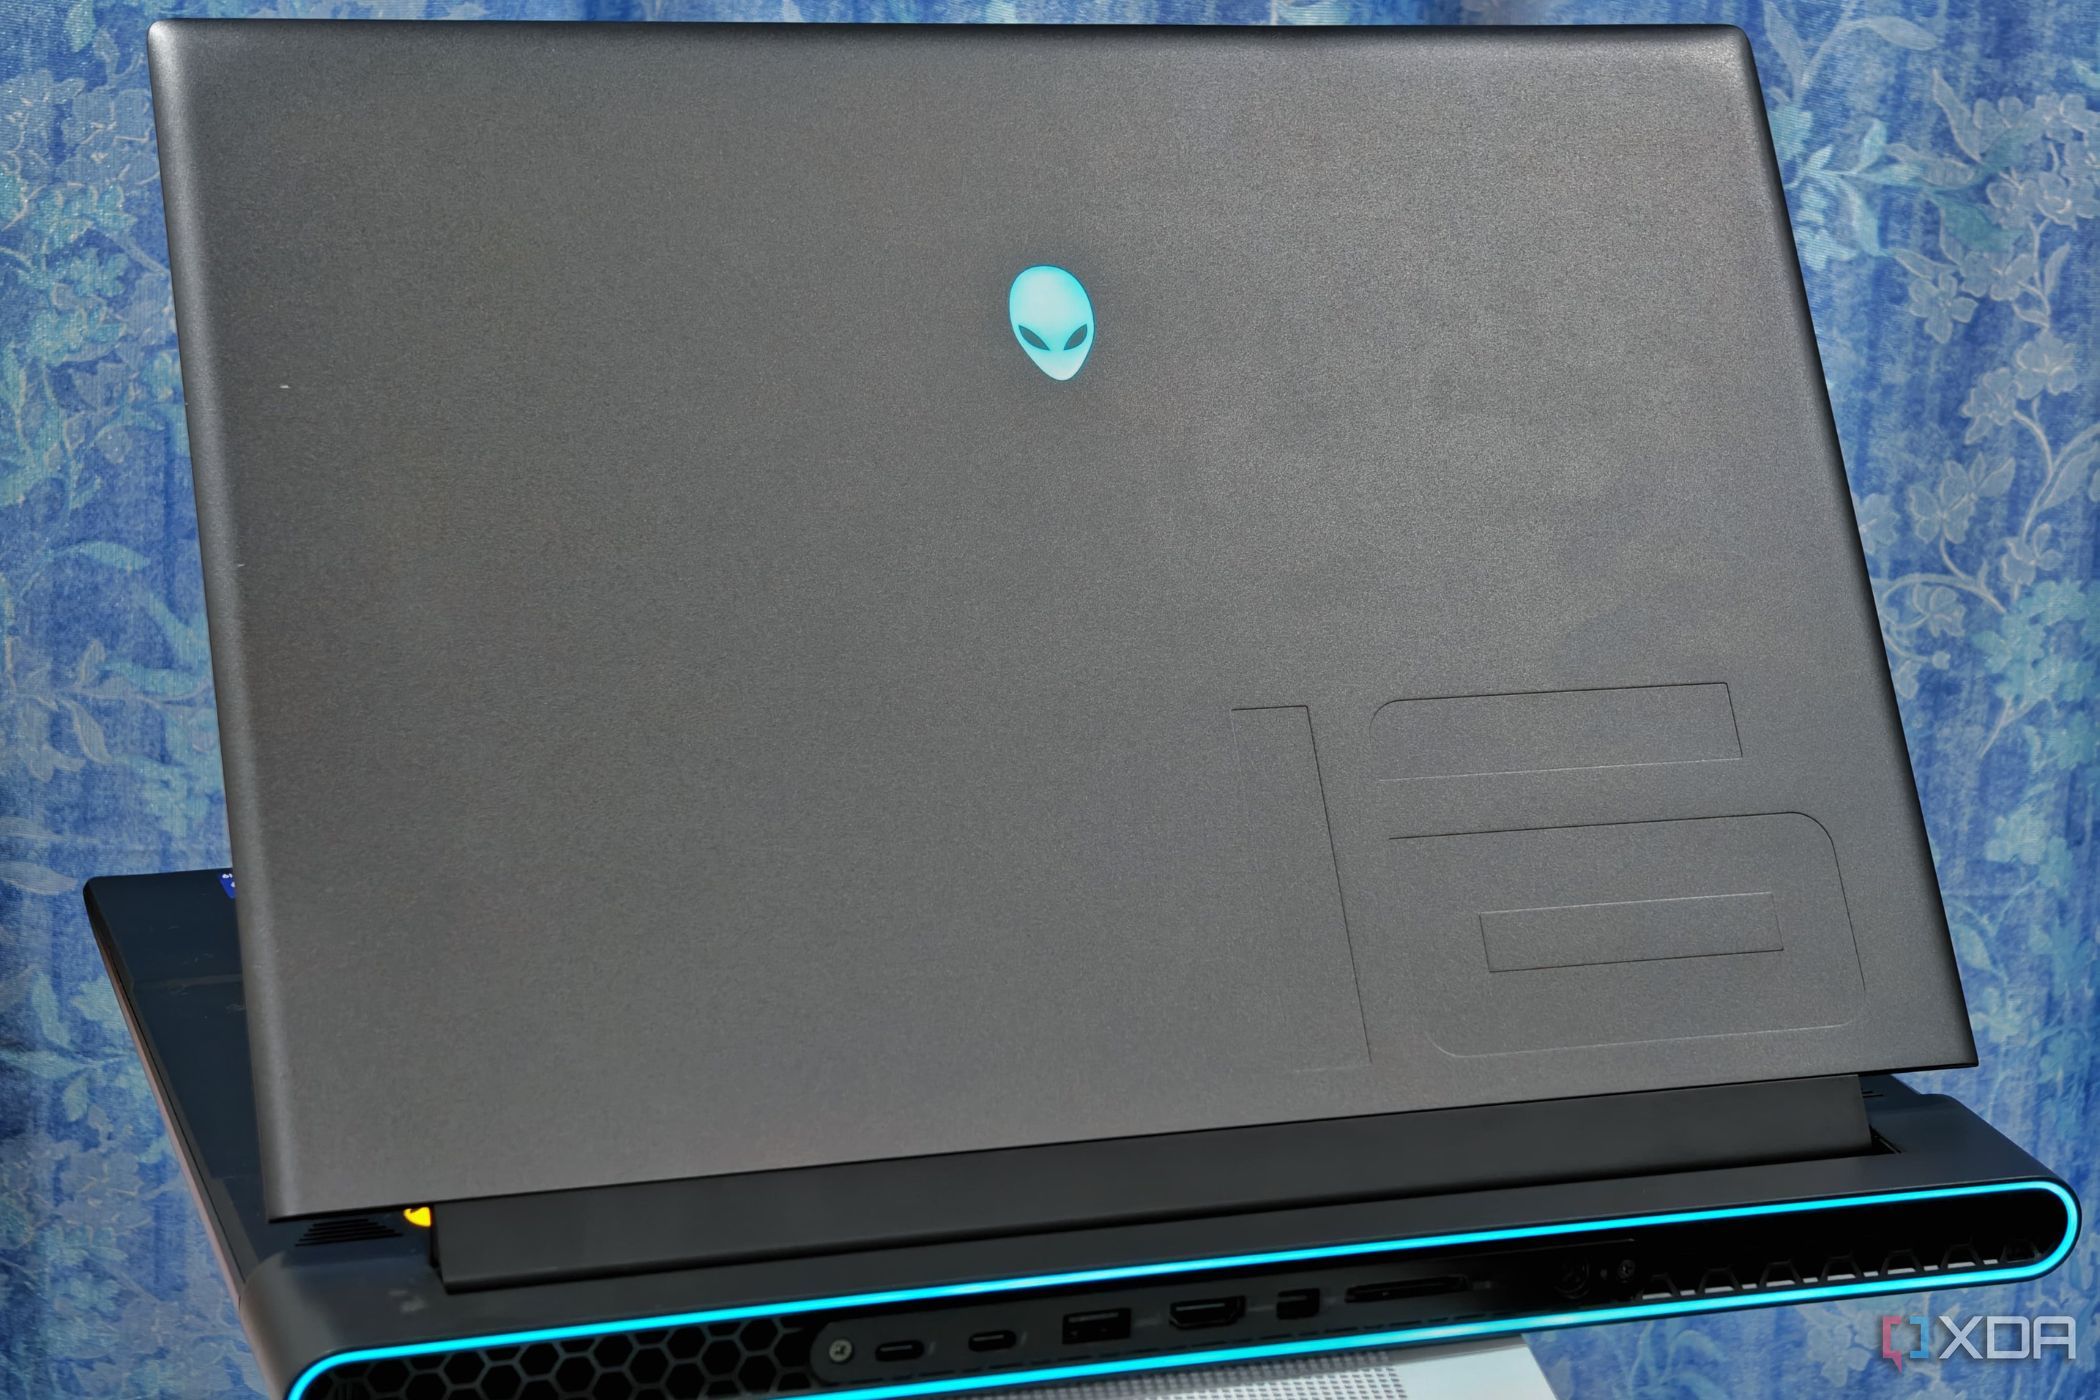 An image showing the Alienware m16 display panel.